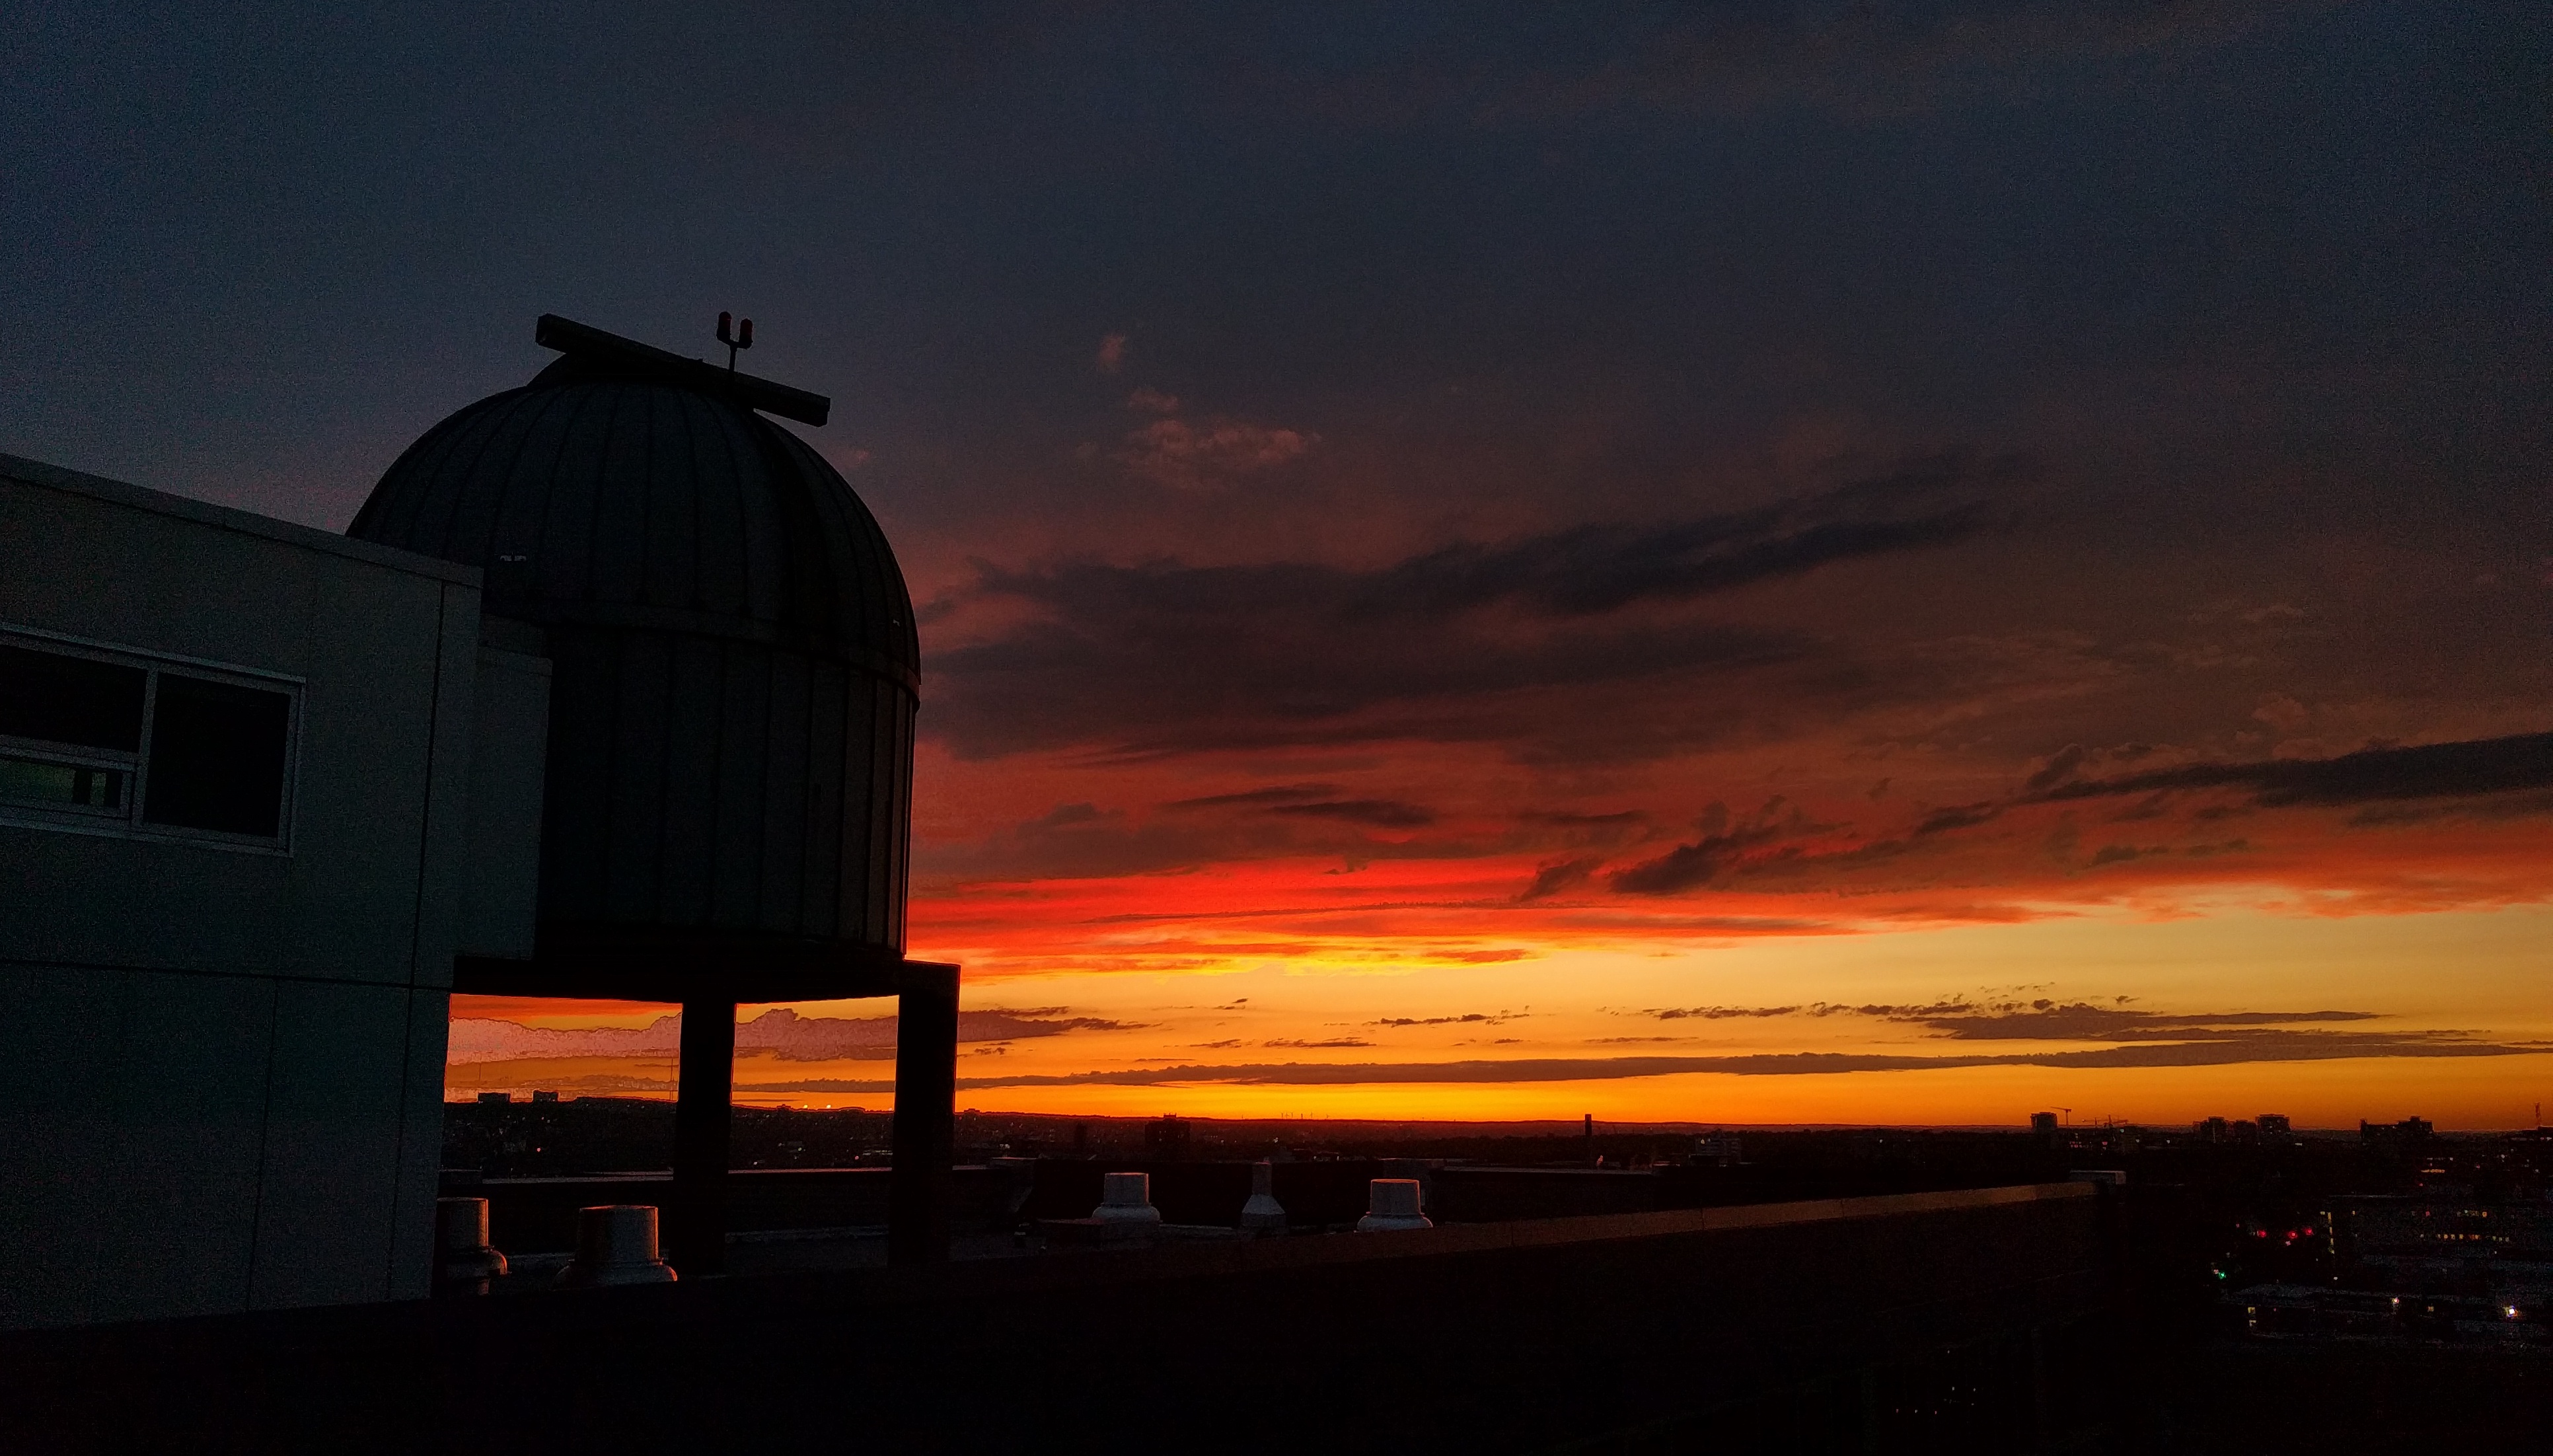 Dark image of the Burke-Gaffney Observatory dome in front of a sunset.